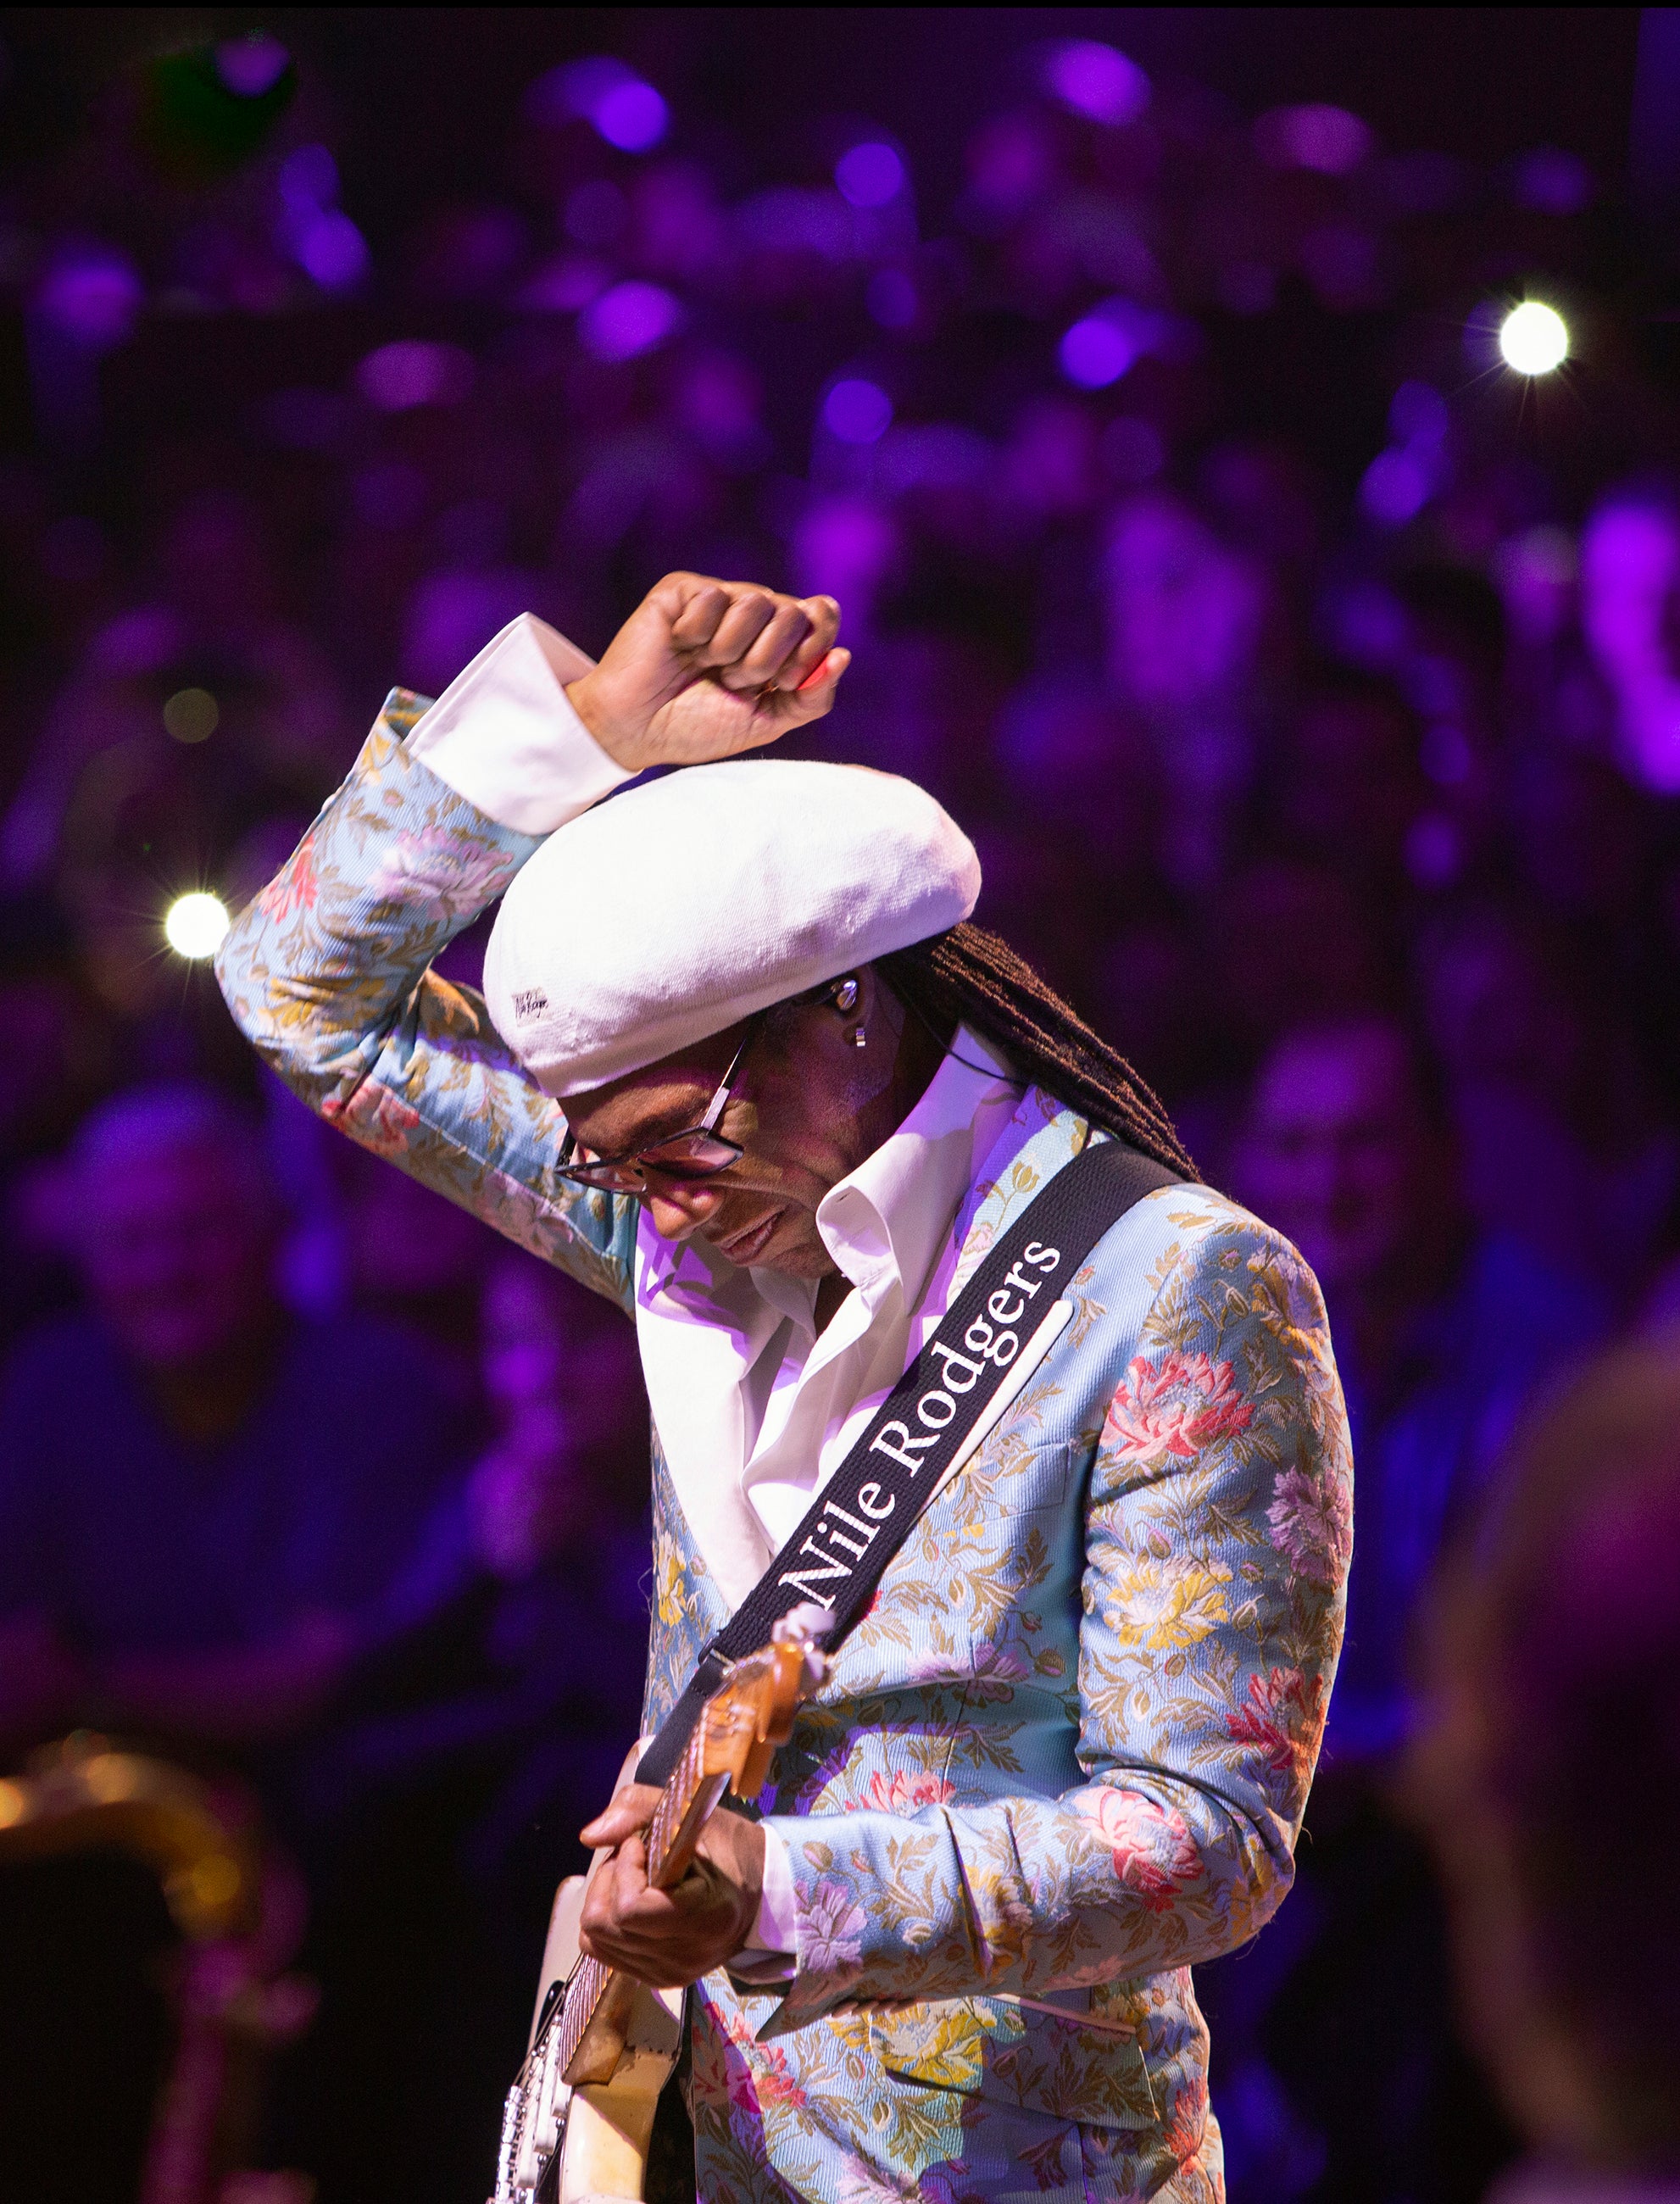 Nile Rodgers & CHIC presale password for early tickets in Llangollen